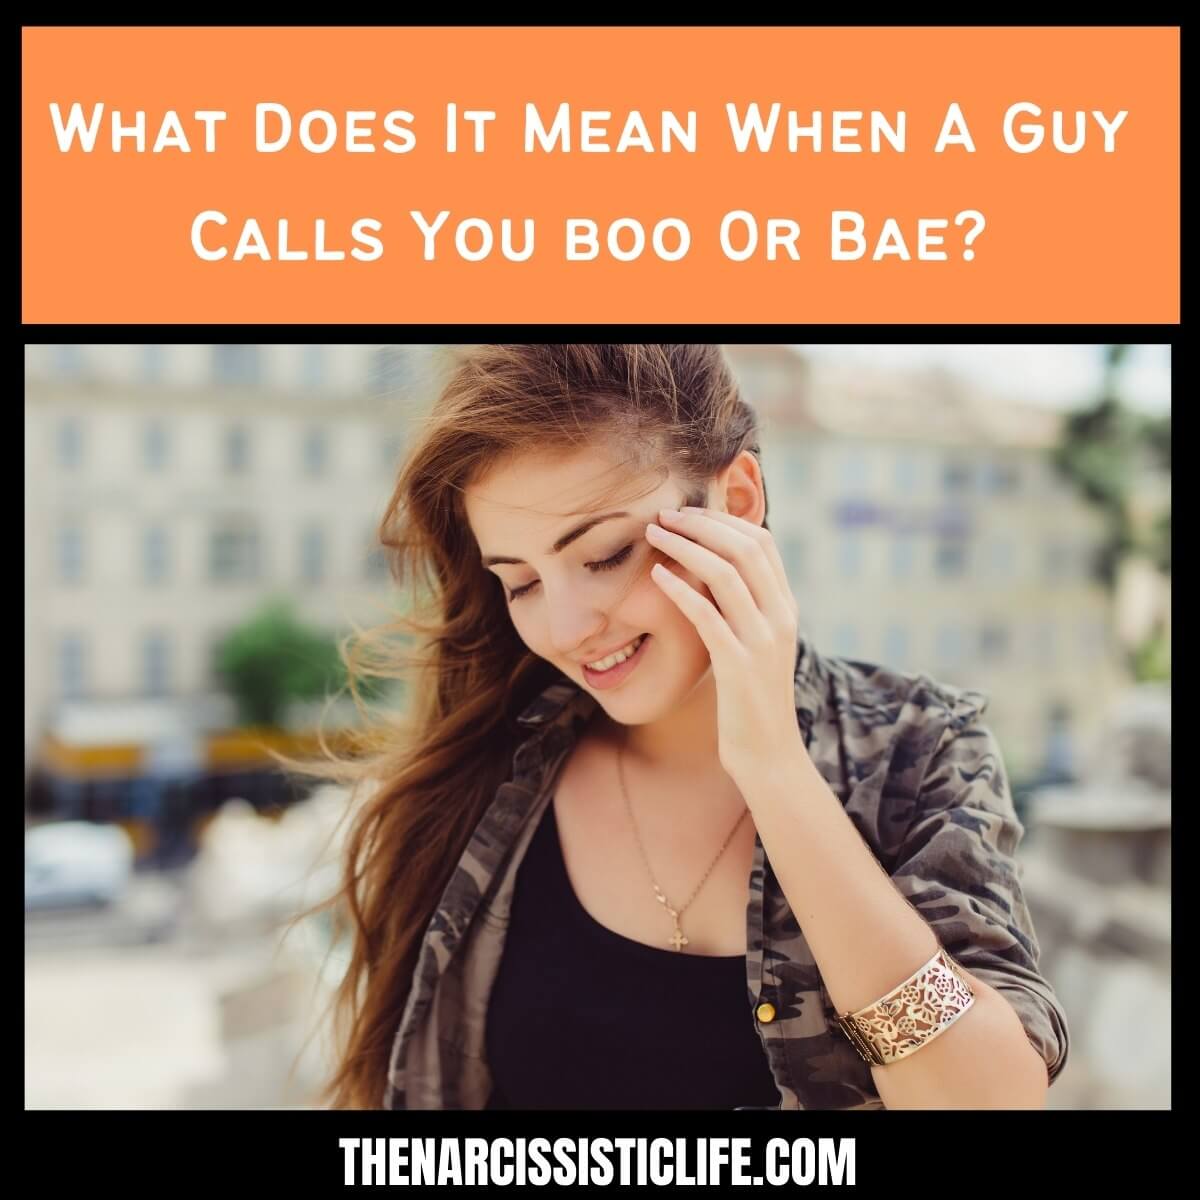 What Does It Mean When A Guy Calls You boo Or Bae